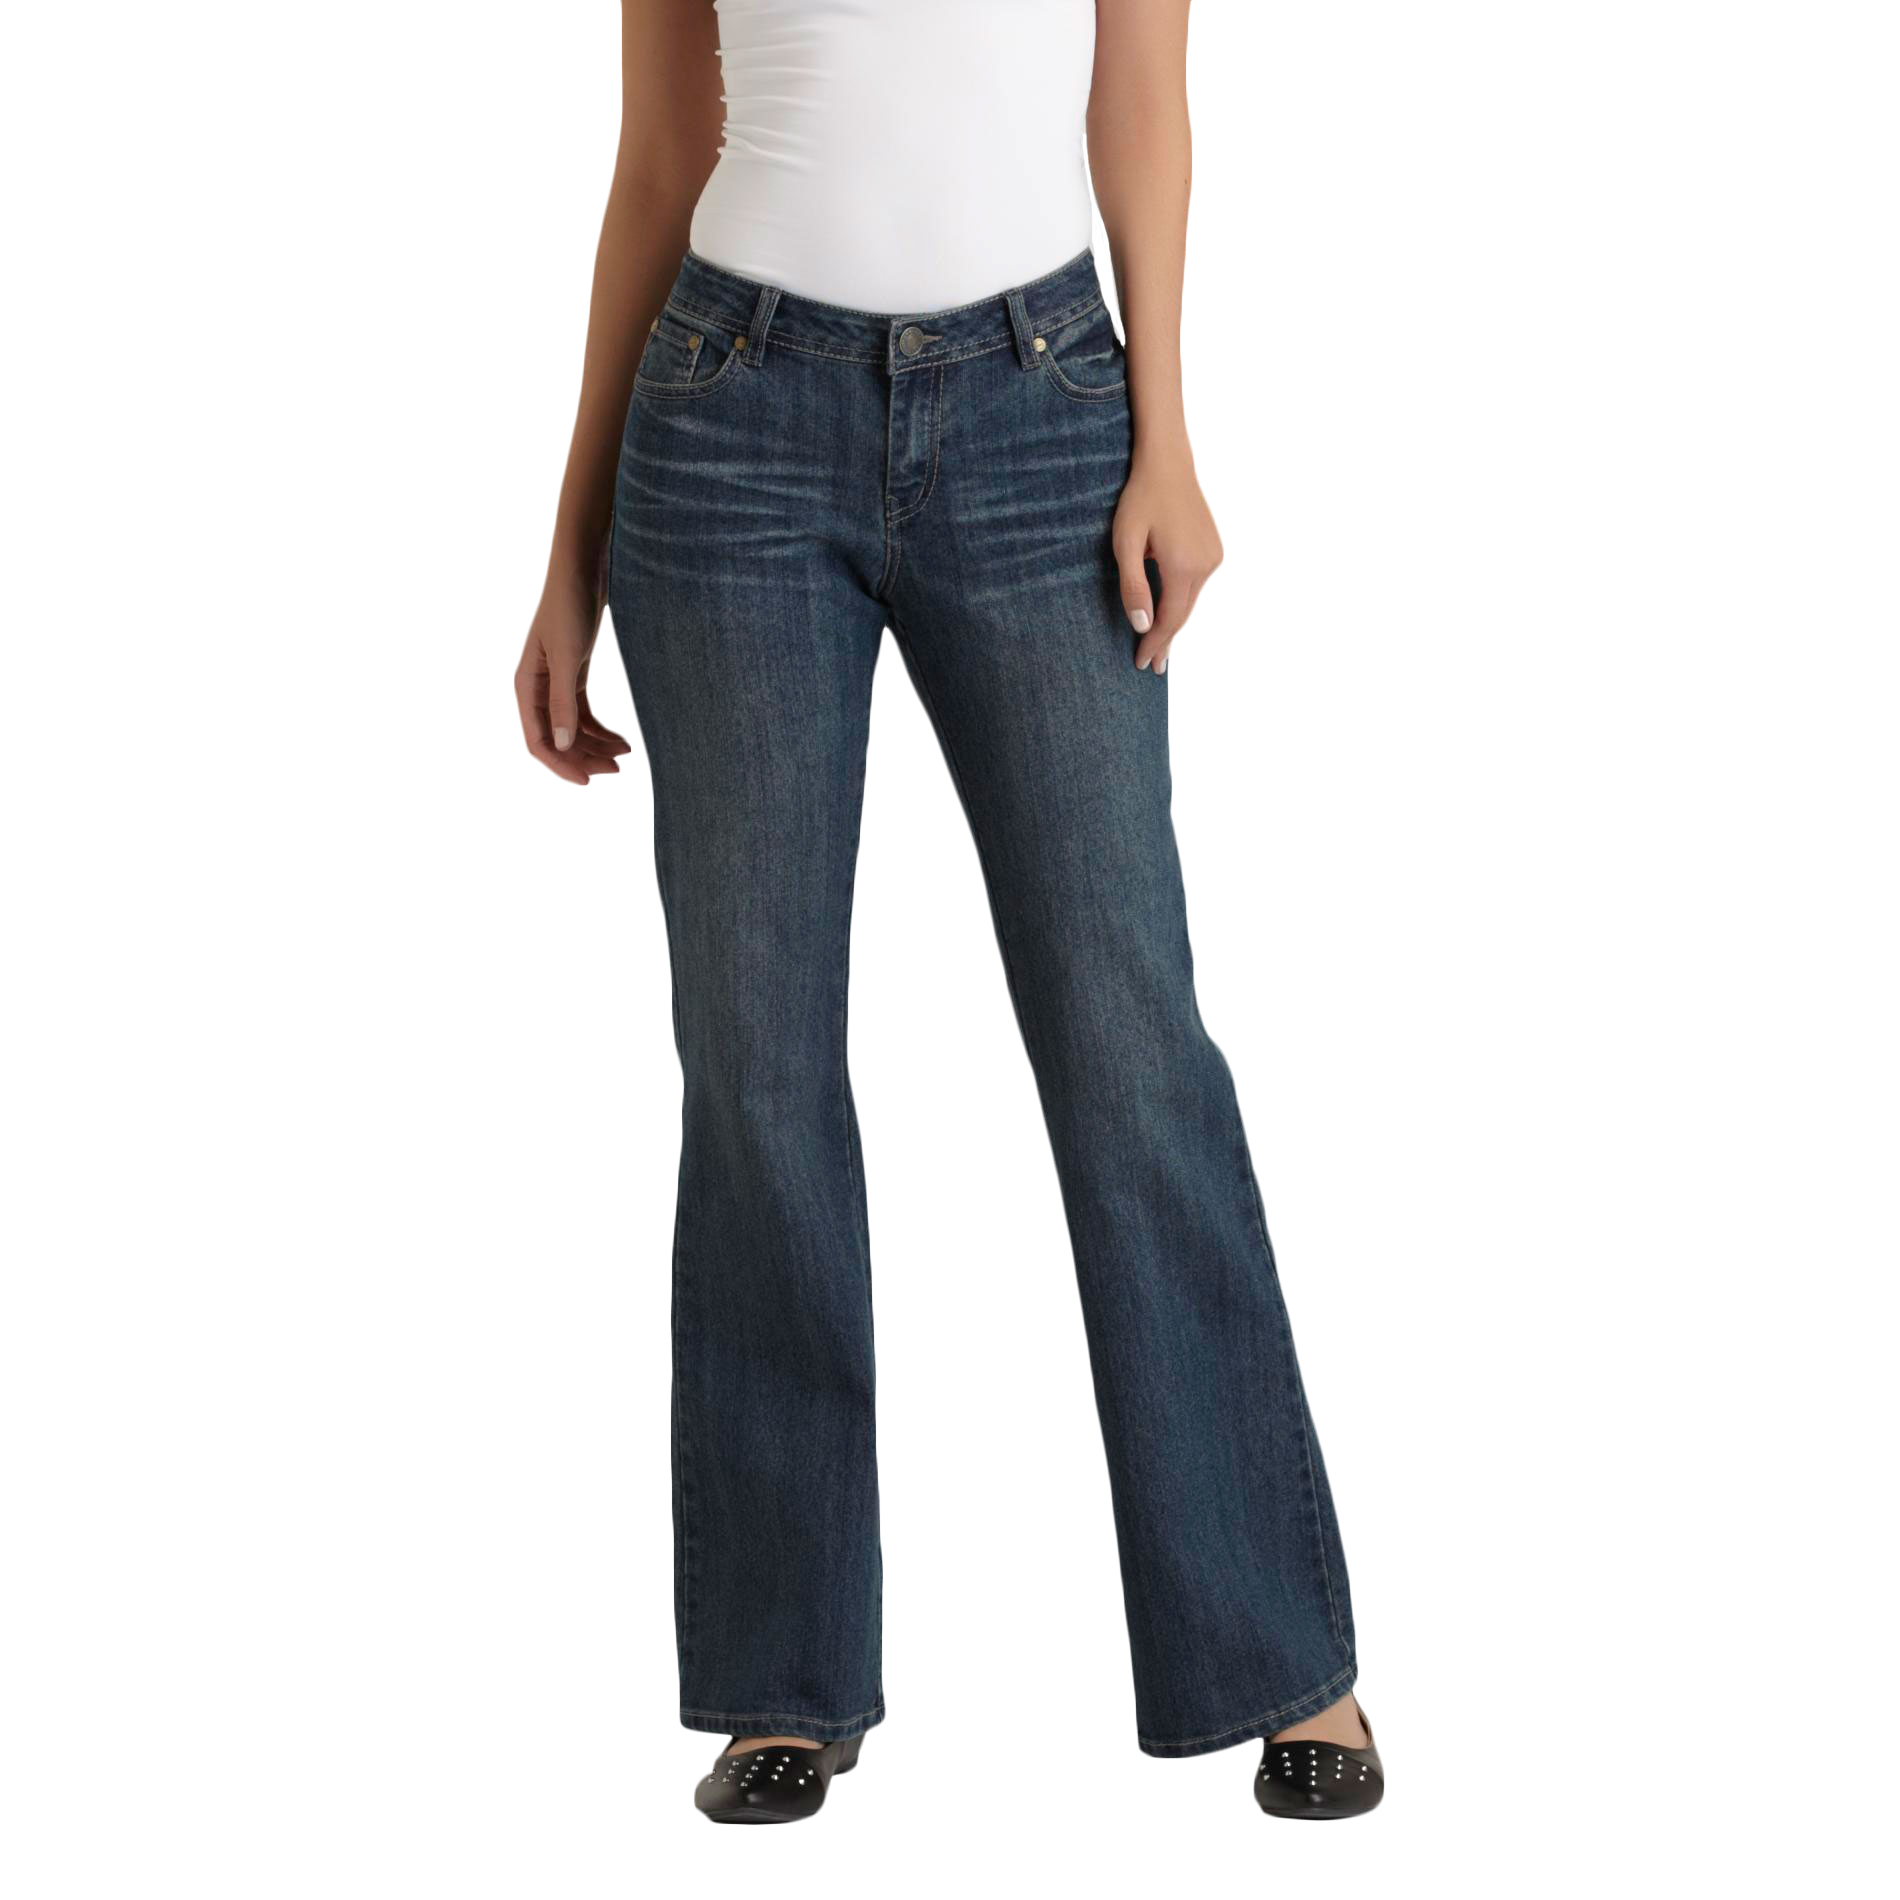 Canyon River Blues Women's Classic Flare Jeans